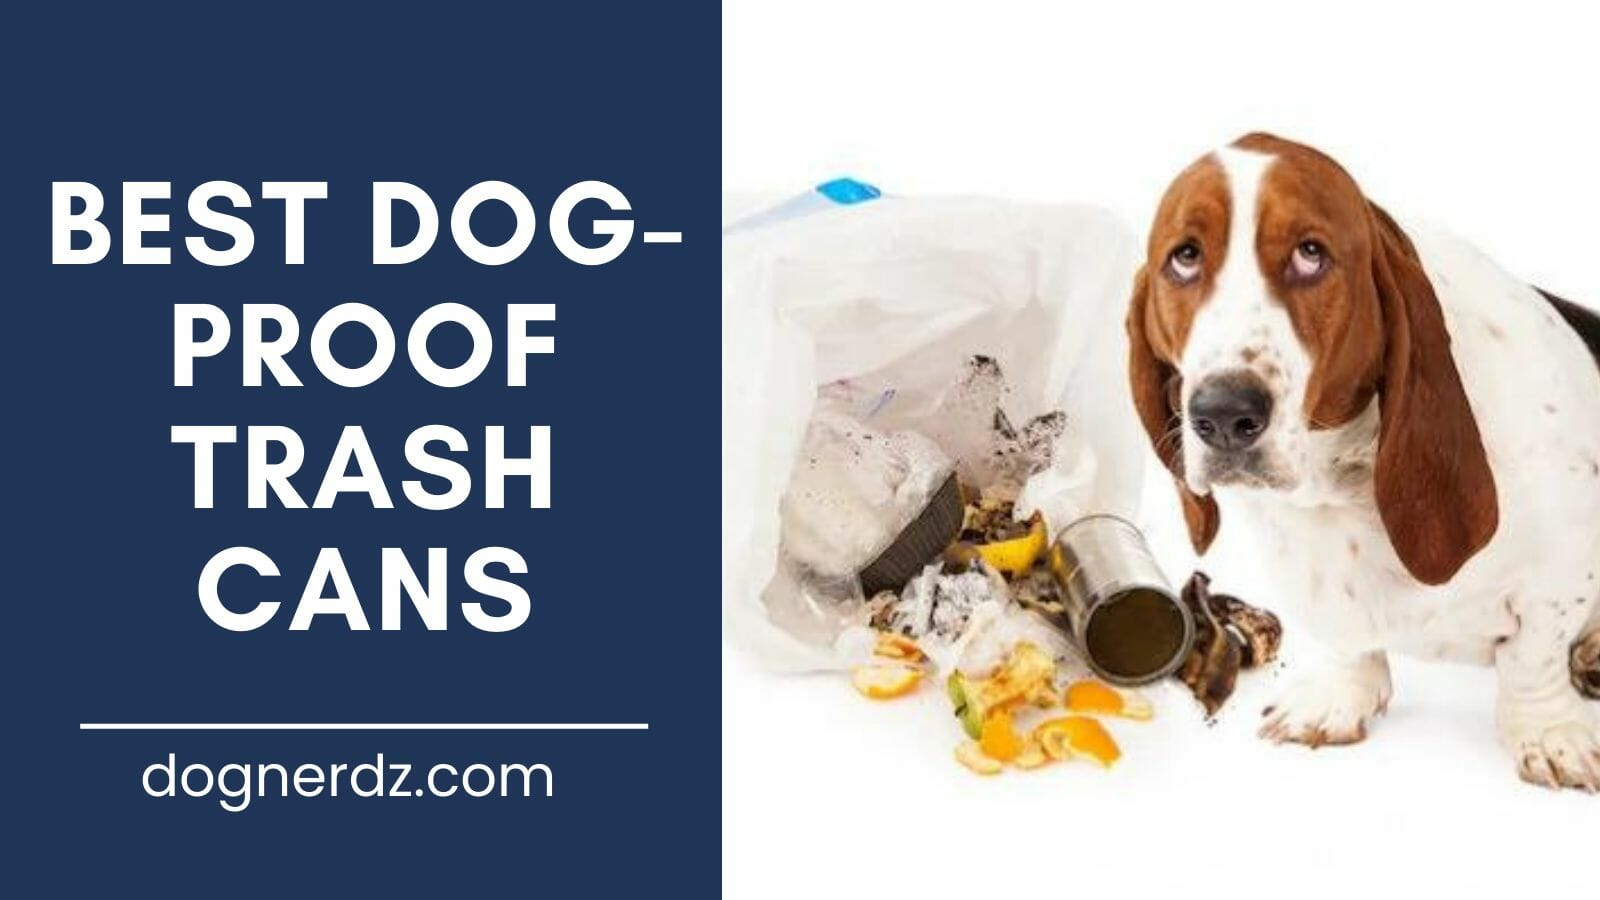 review of the best dog-proof trash cans